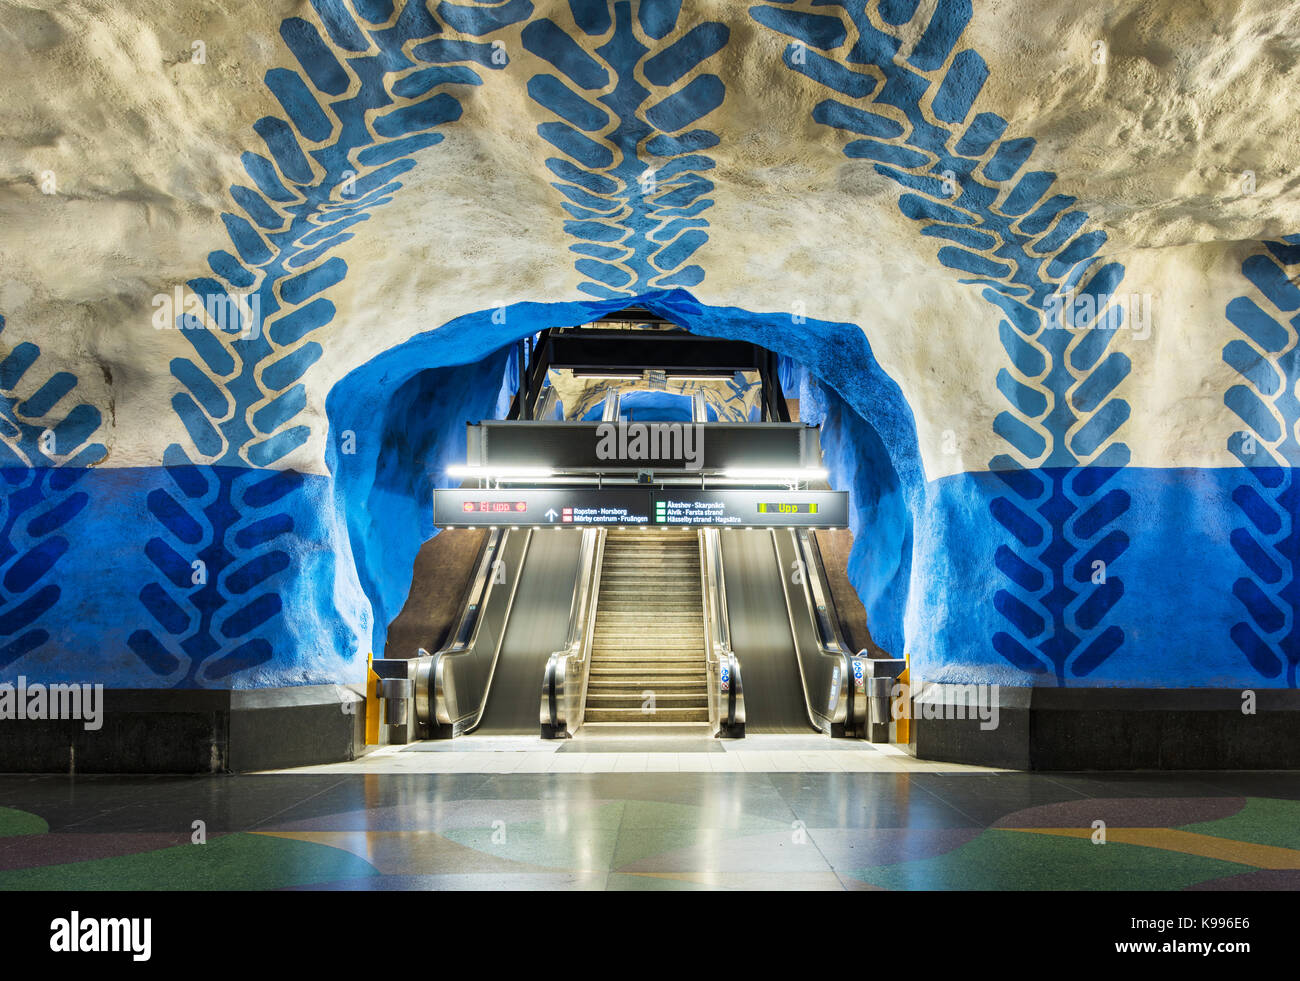 T-Centralen station on the Stockholm Metro, or T-Bana, in Sweden. The Stockholm Metro is considered to be the longest art museum in the world. Stock Photo